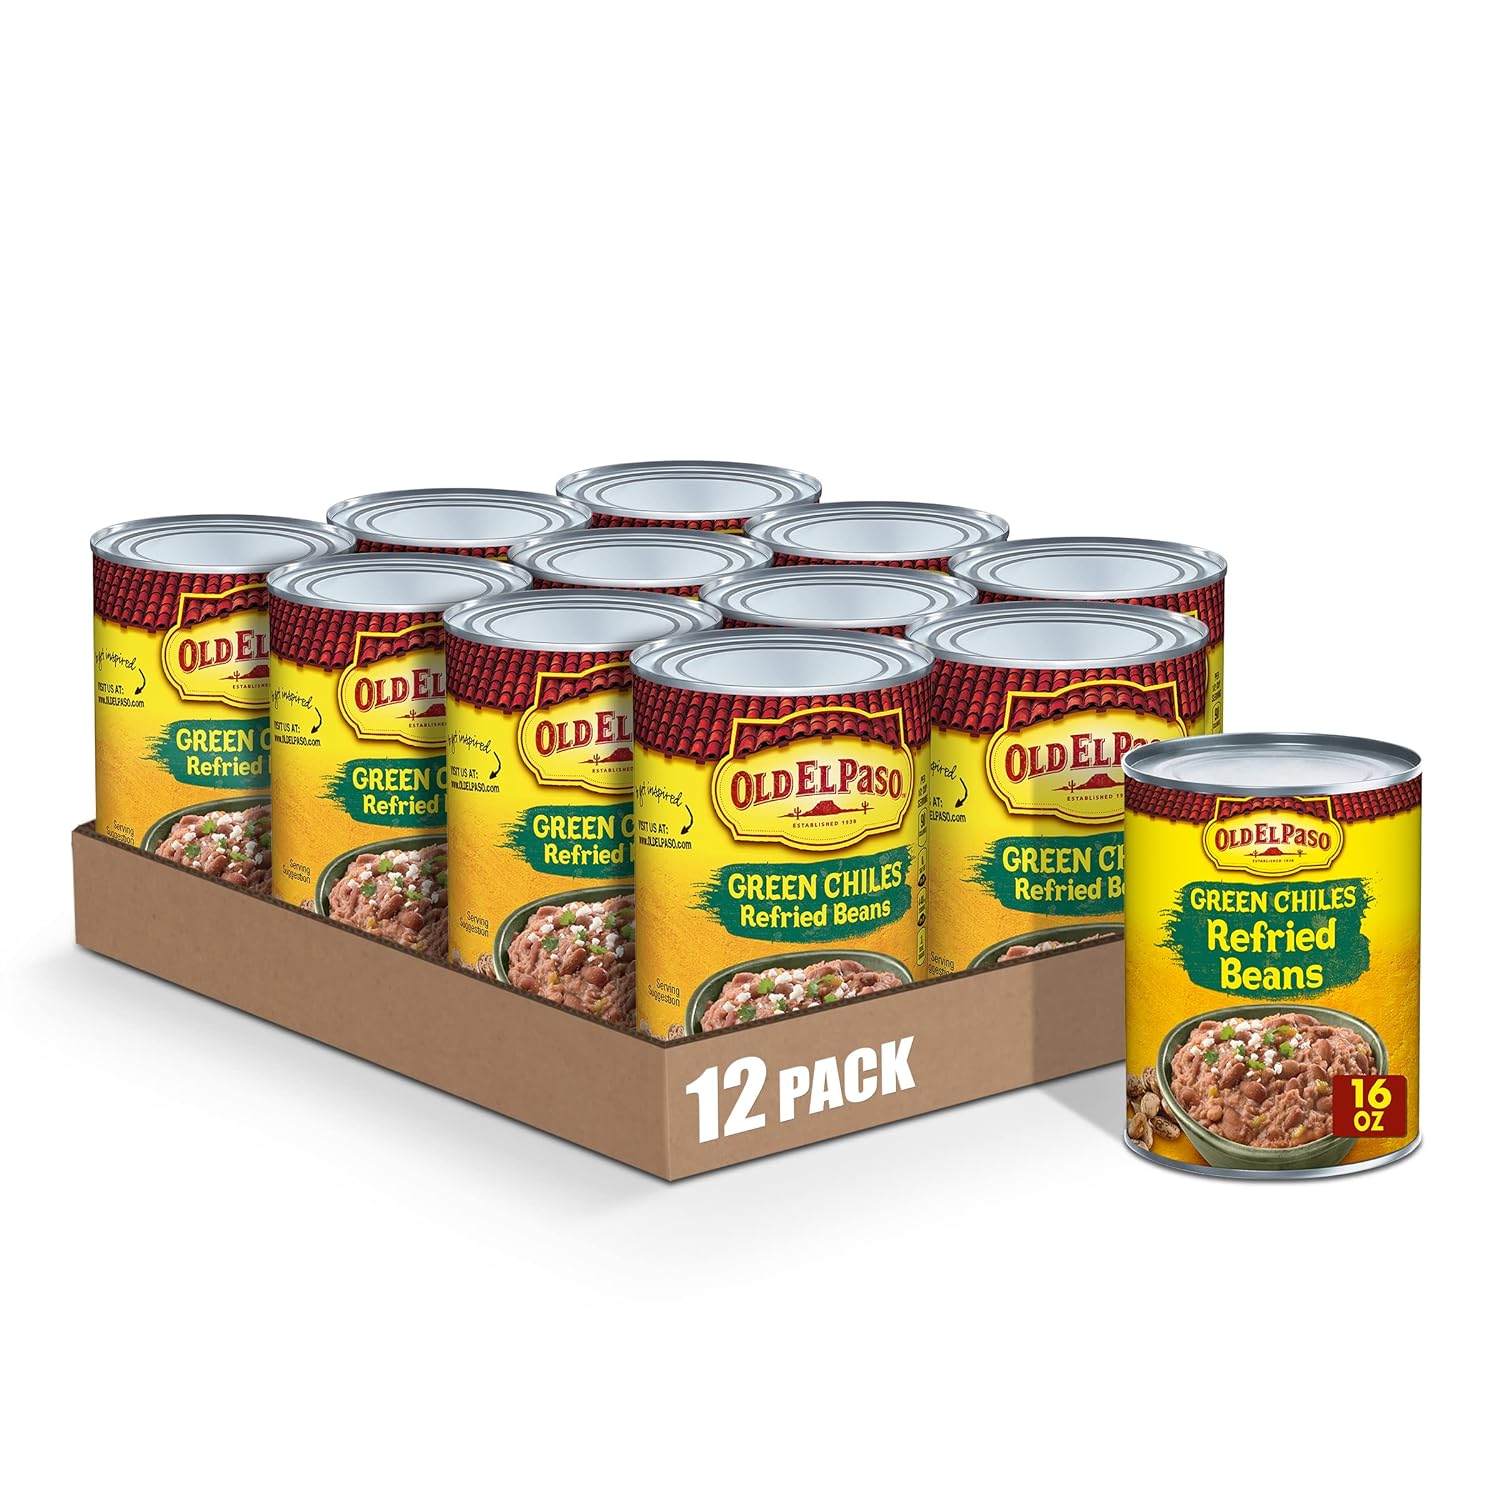 Old El Paso Green Chiles Refried Beans, 16 oz. (Pack of 12)